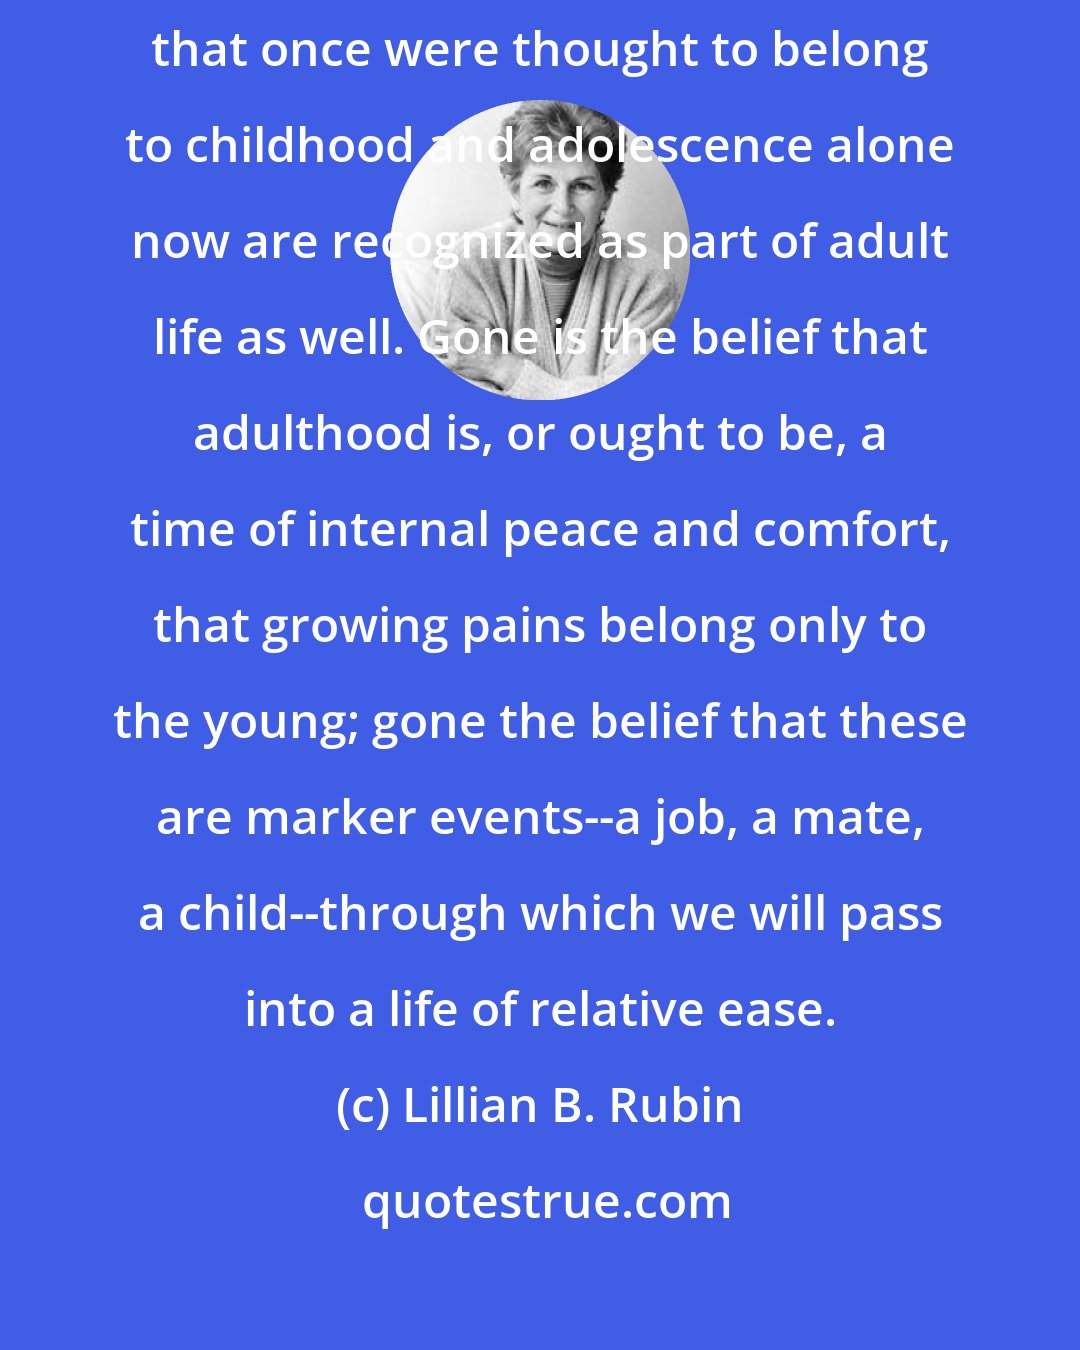 Lillian B. Rubin: Personal change, growth, development, identity formation--these tasks that once were thought to belong to childhood and adolescence alone now are recognized as part of adult life as well. Gone is the belief that adulthood is, or ought to be, a time of internal peace and comfort, that growing pains belong only to the young; gone the belief that these are marker events--a job, a mate, a child--through which we will pass into a life of relative ease.